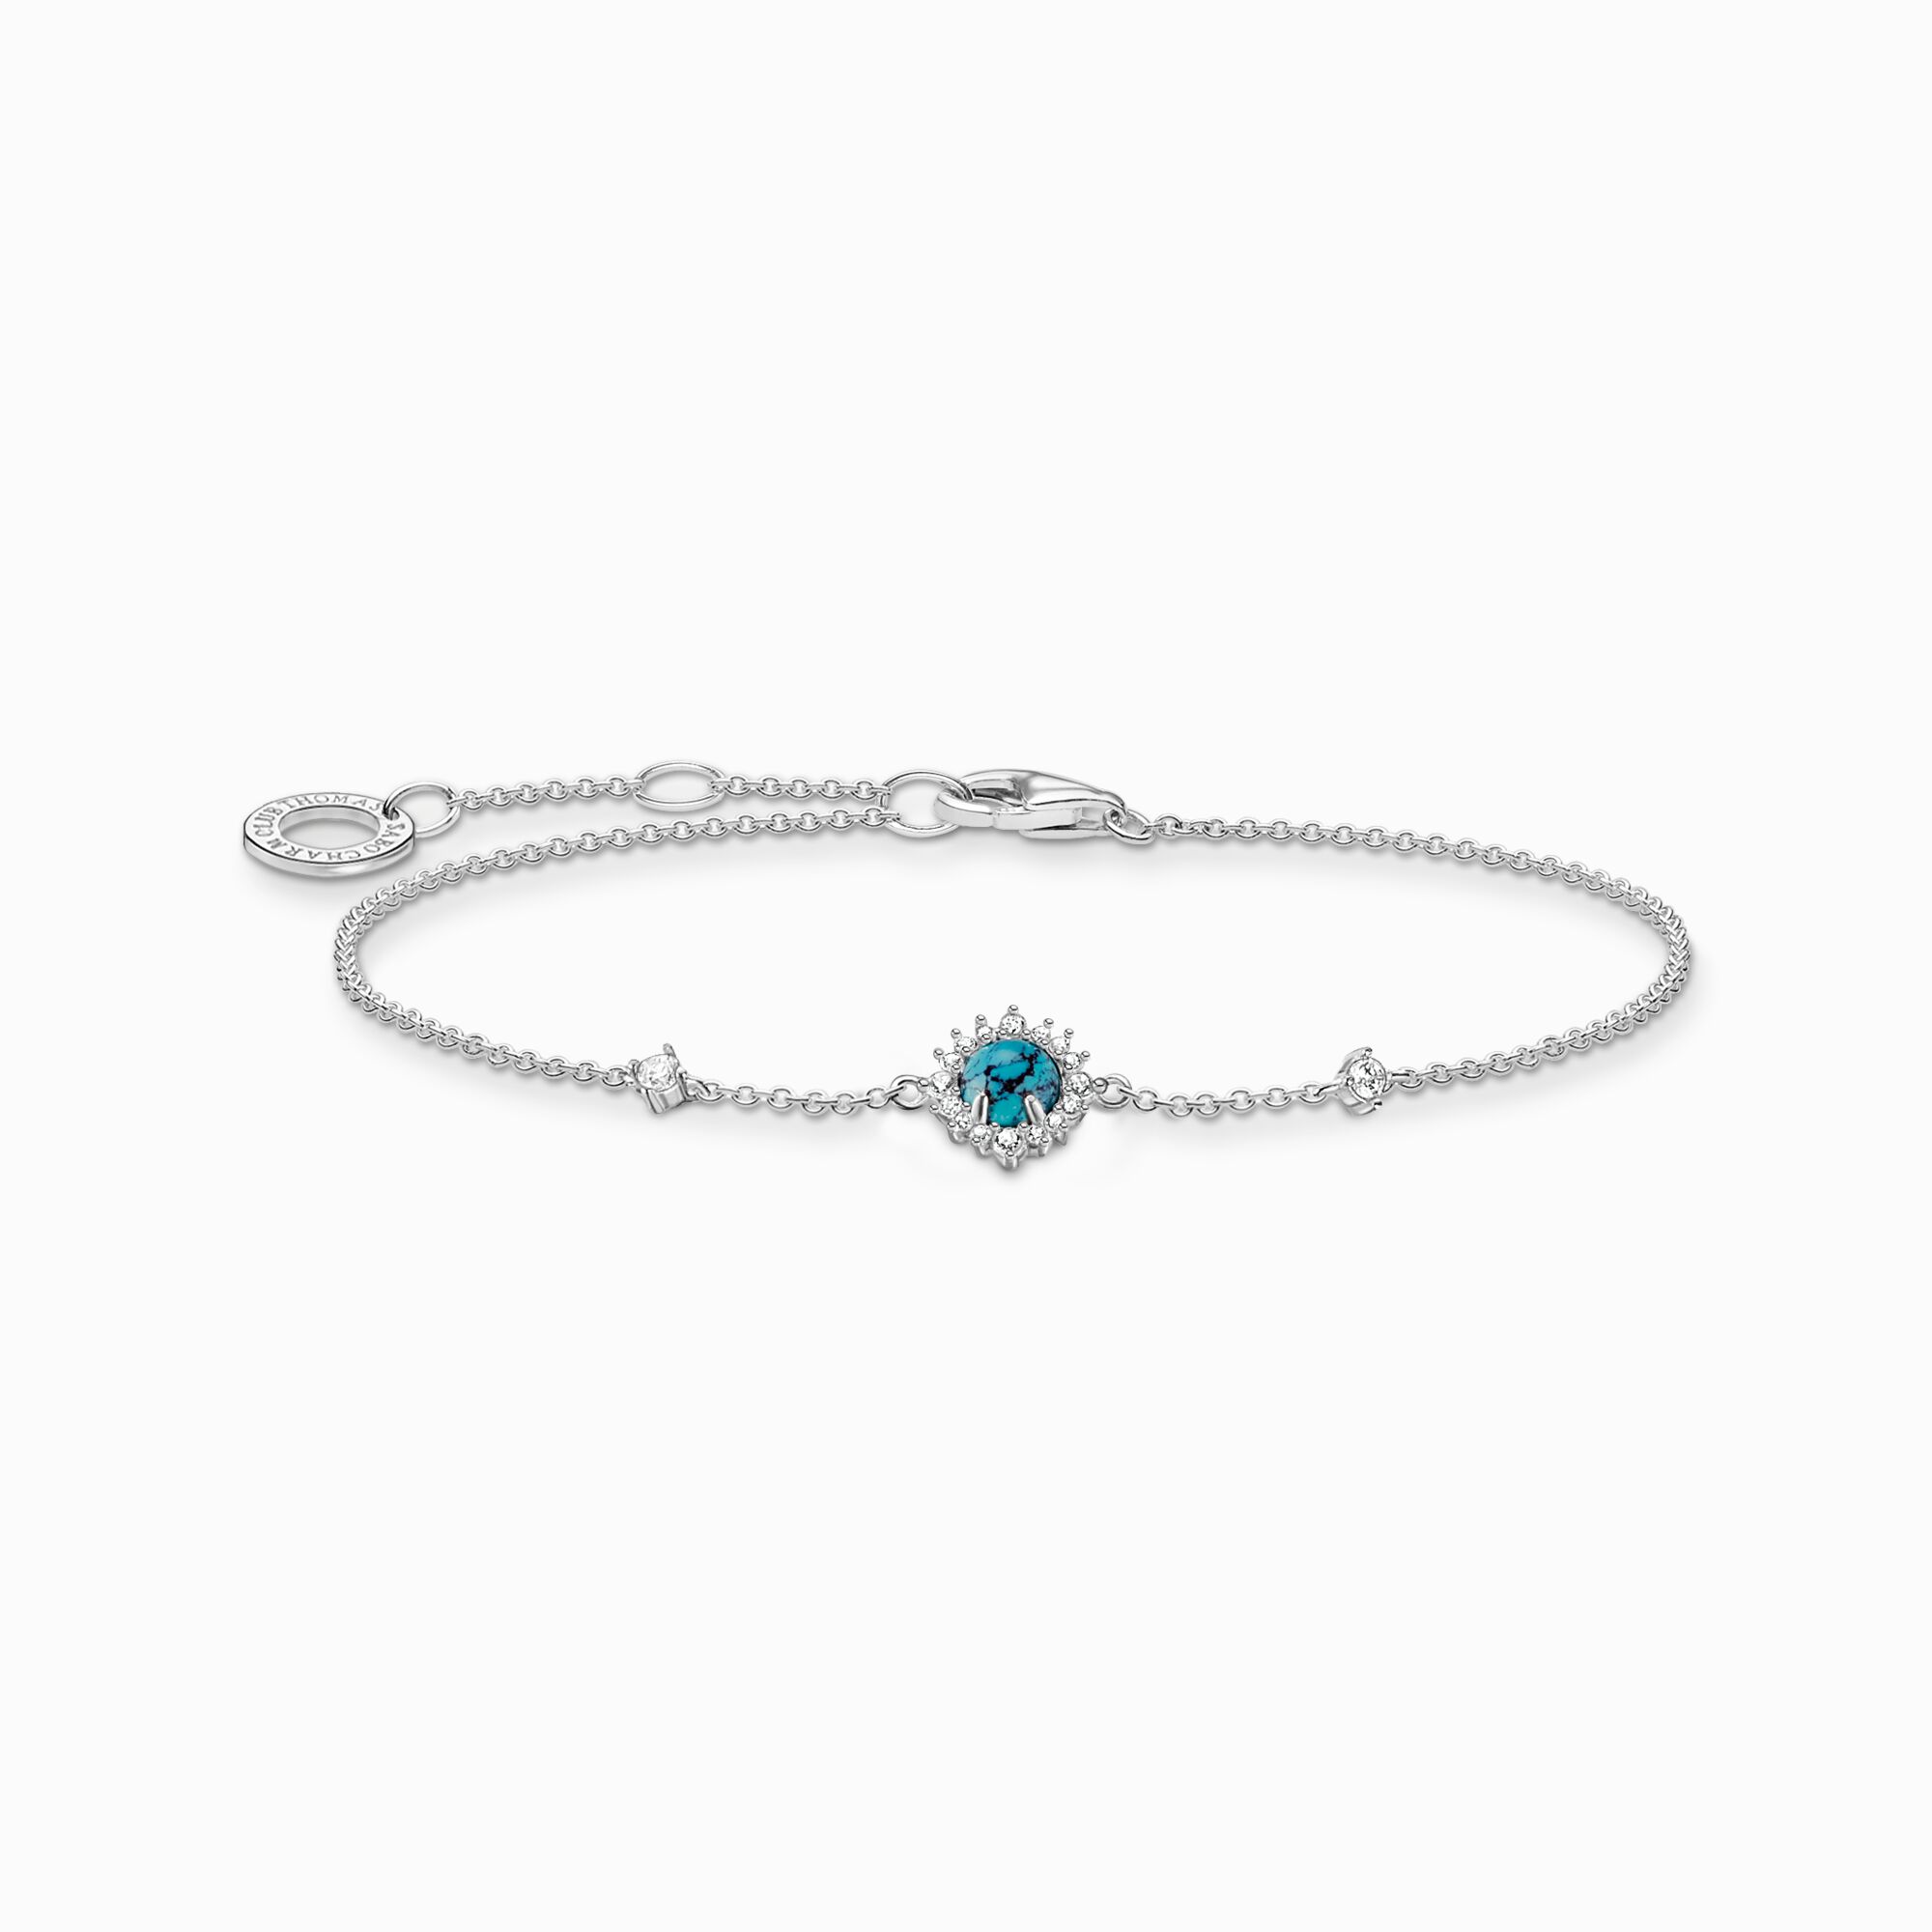 Bracelet turquoise stone from the Charming Collection collection in the THOMAS SABO online store